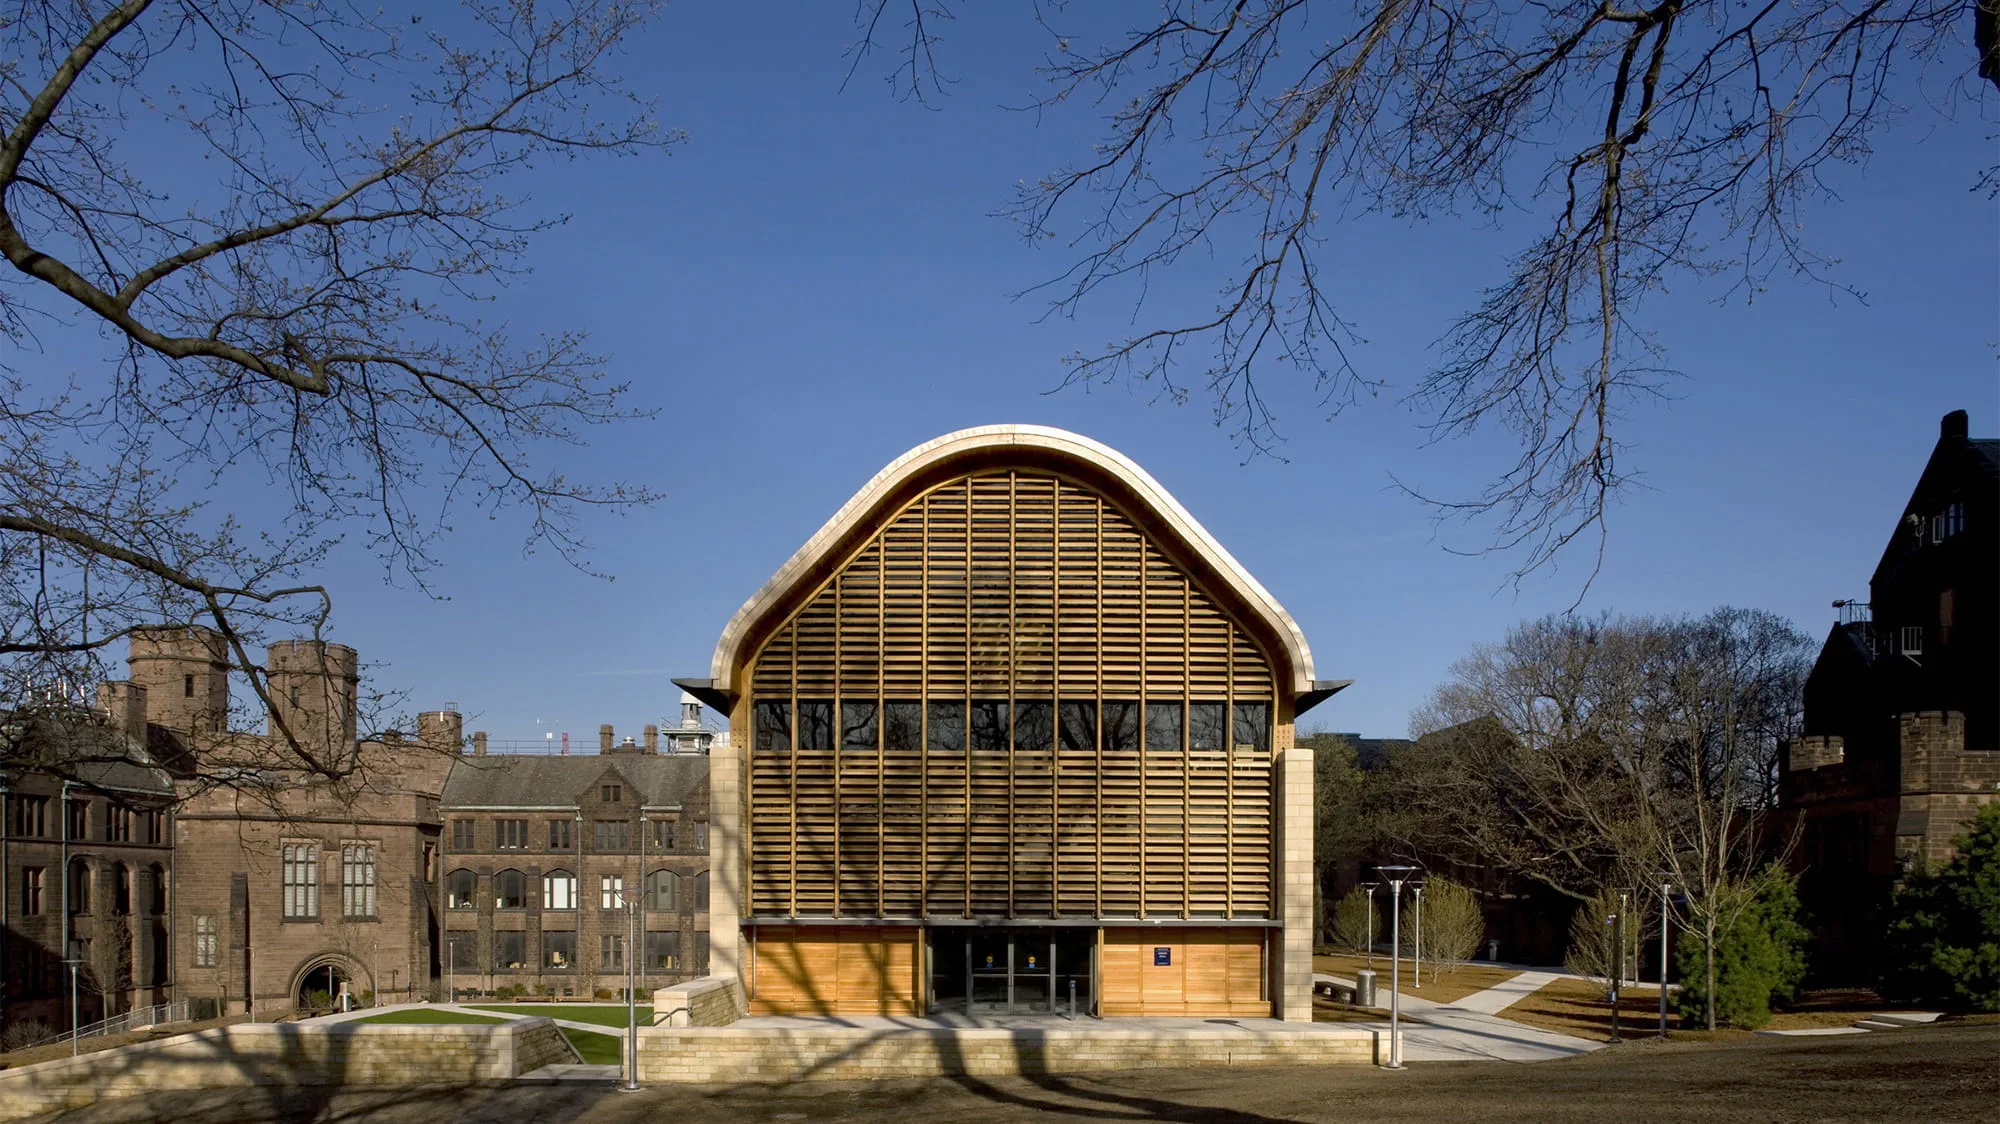 The new building for the School of Forestry and Environmental Studies at Yale University. Photo: Morley Von Sternberg